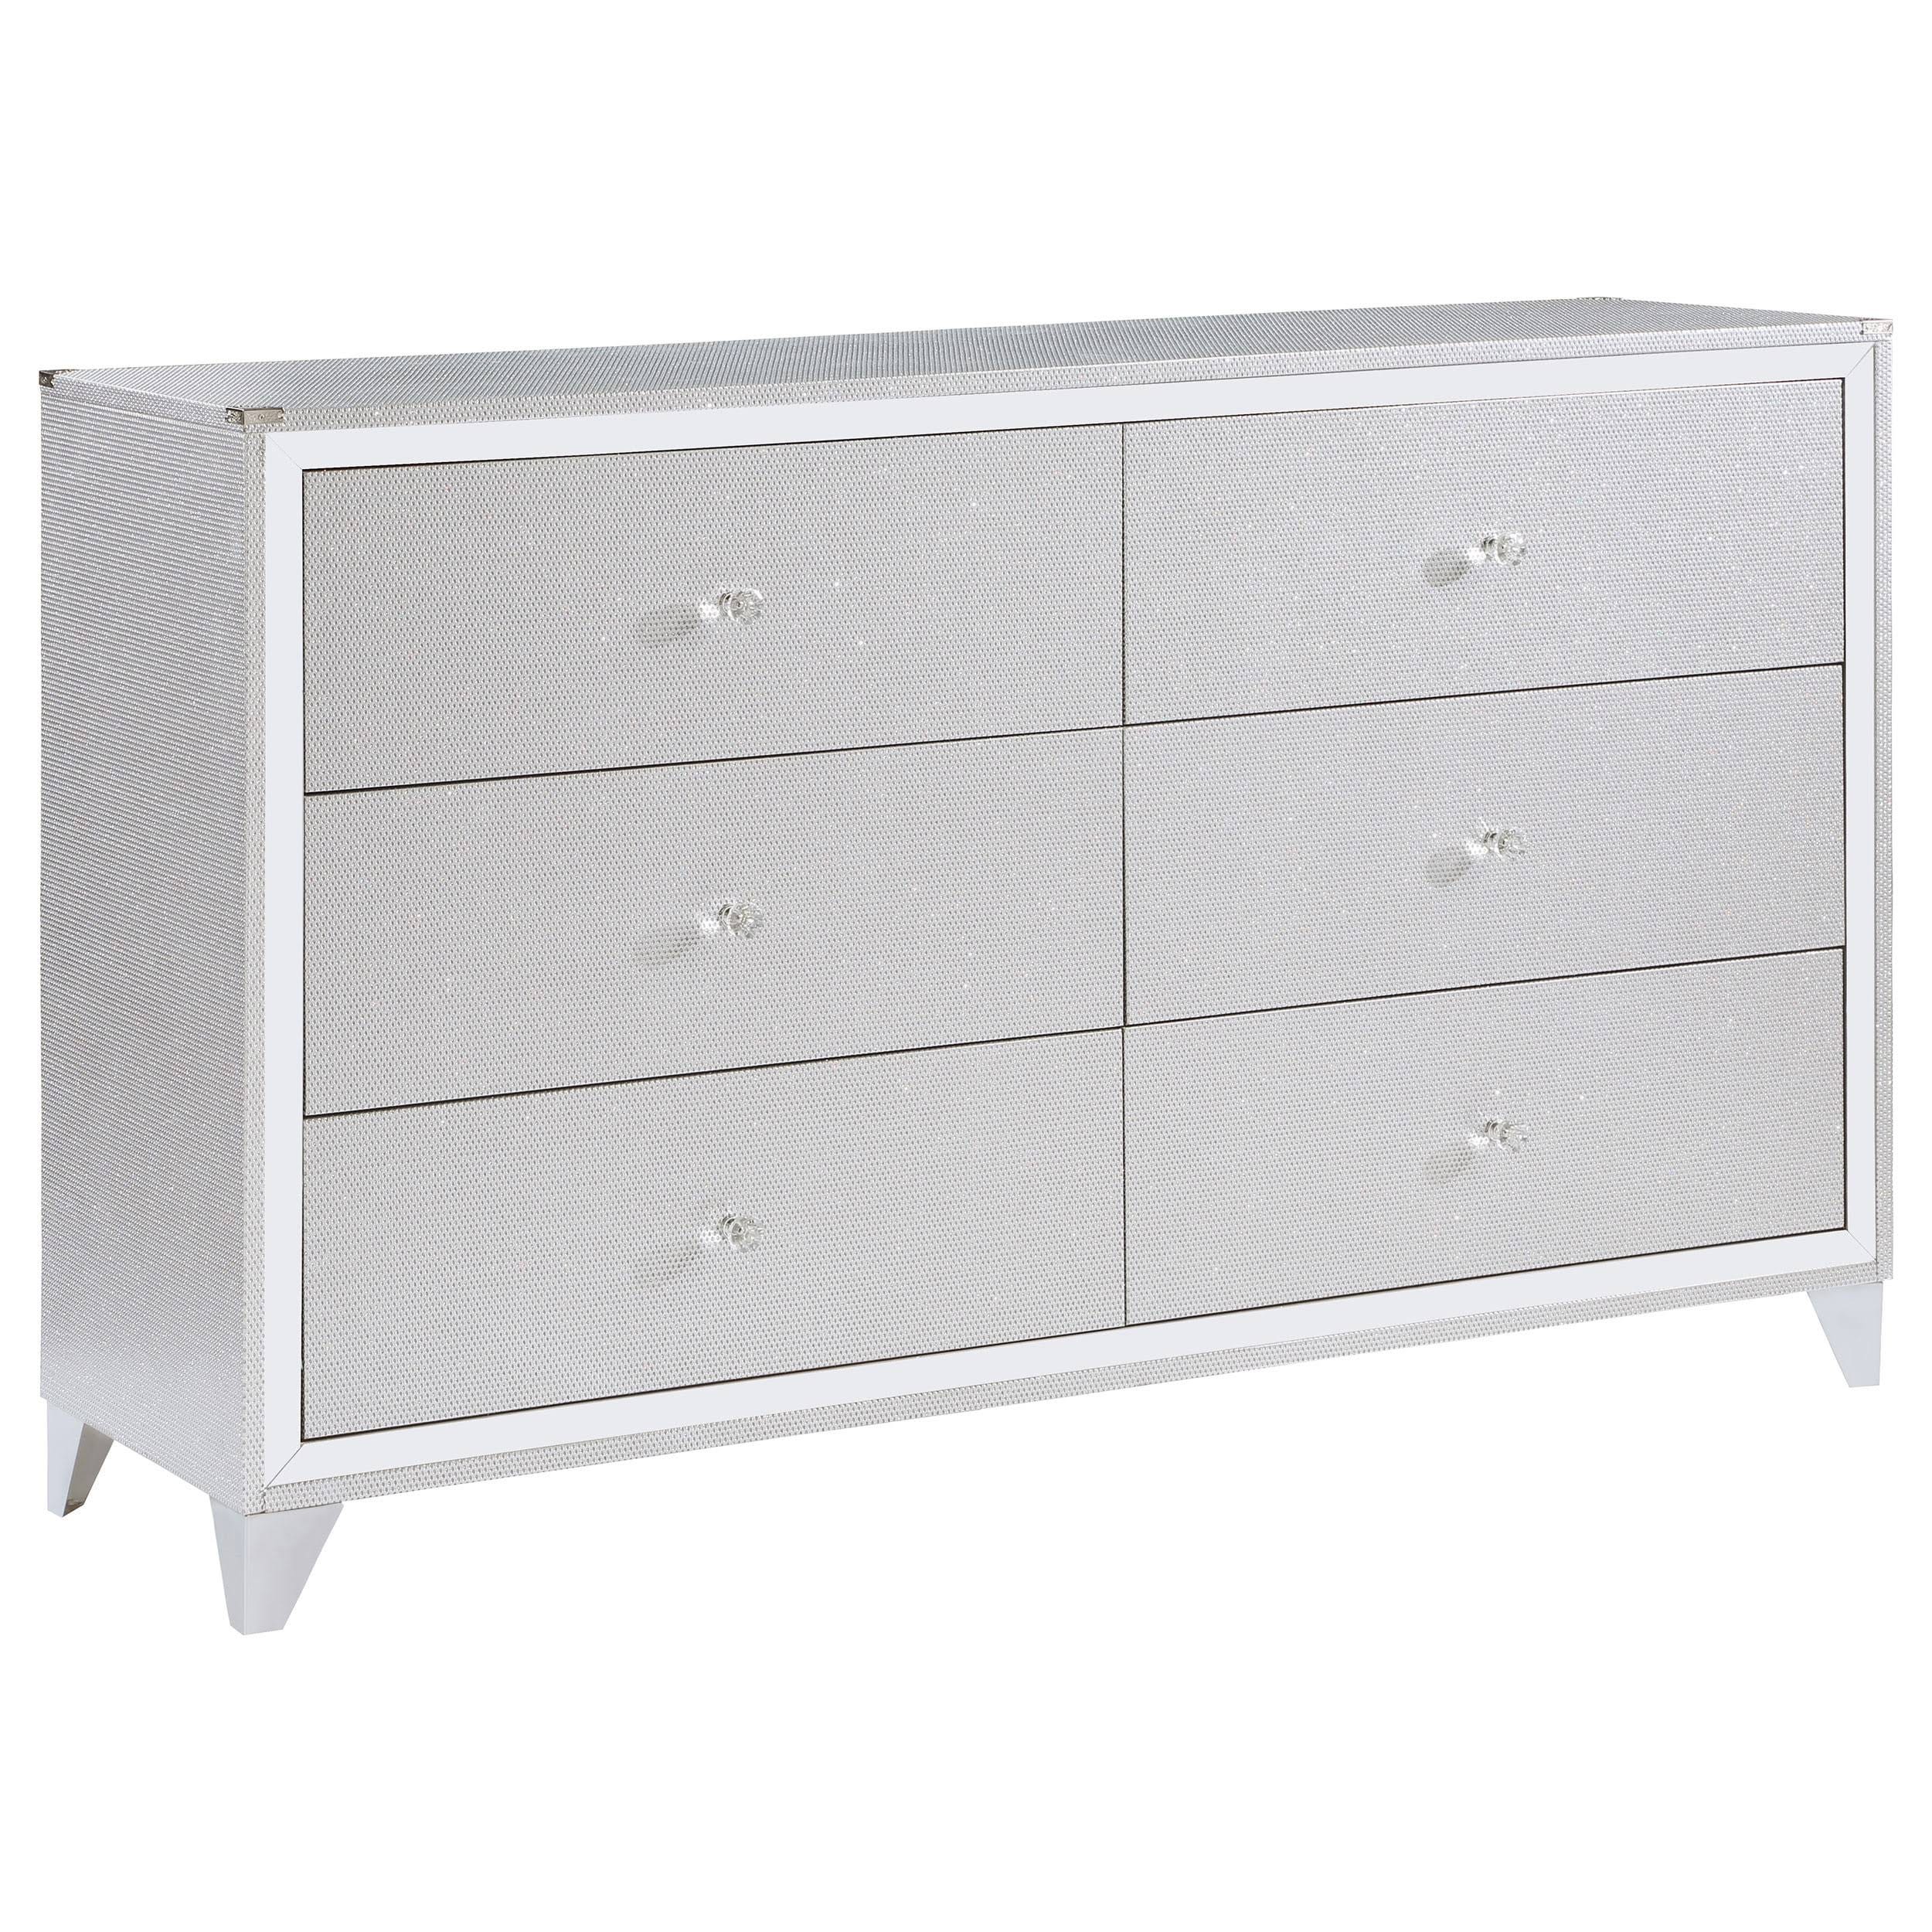 Contemporary 6-Drawer Tall Dresser in Silver | Image